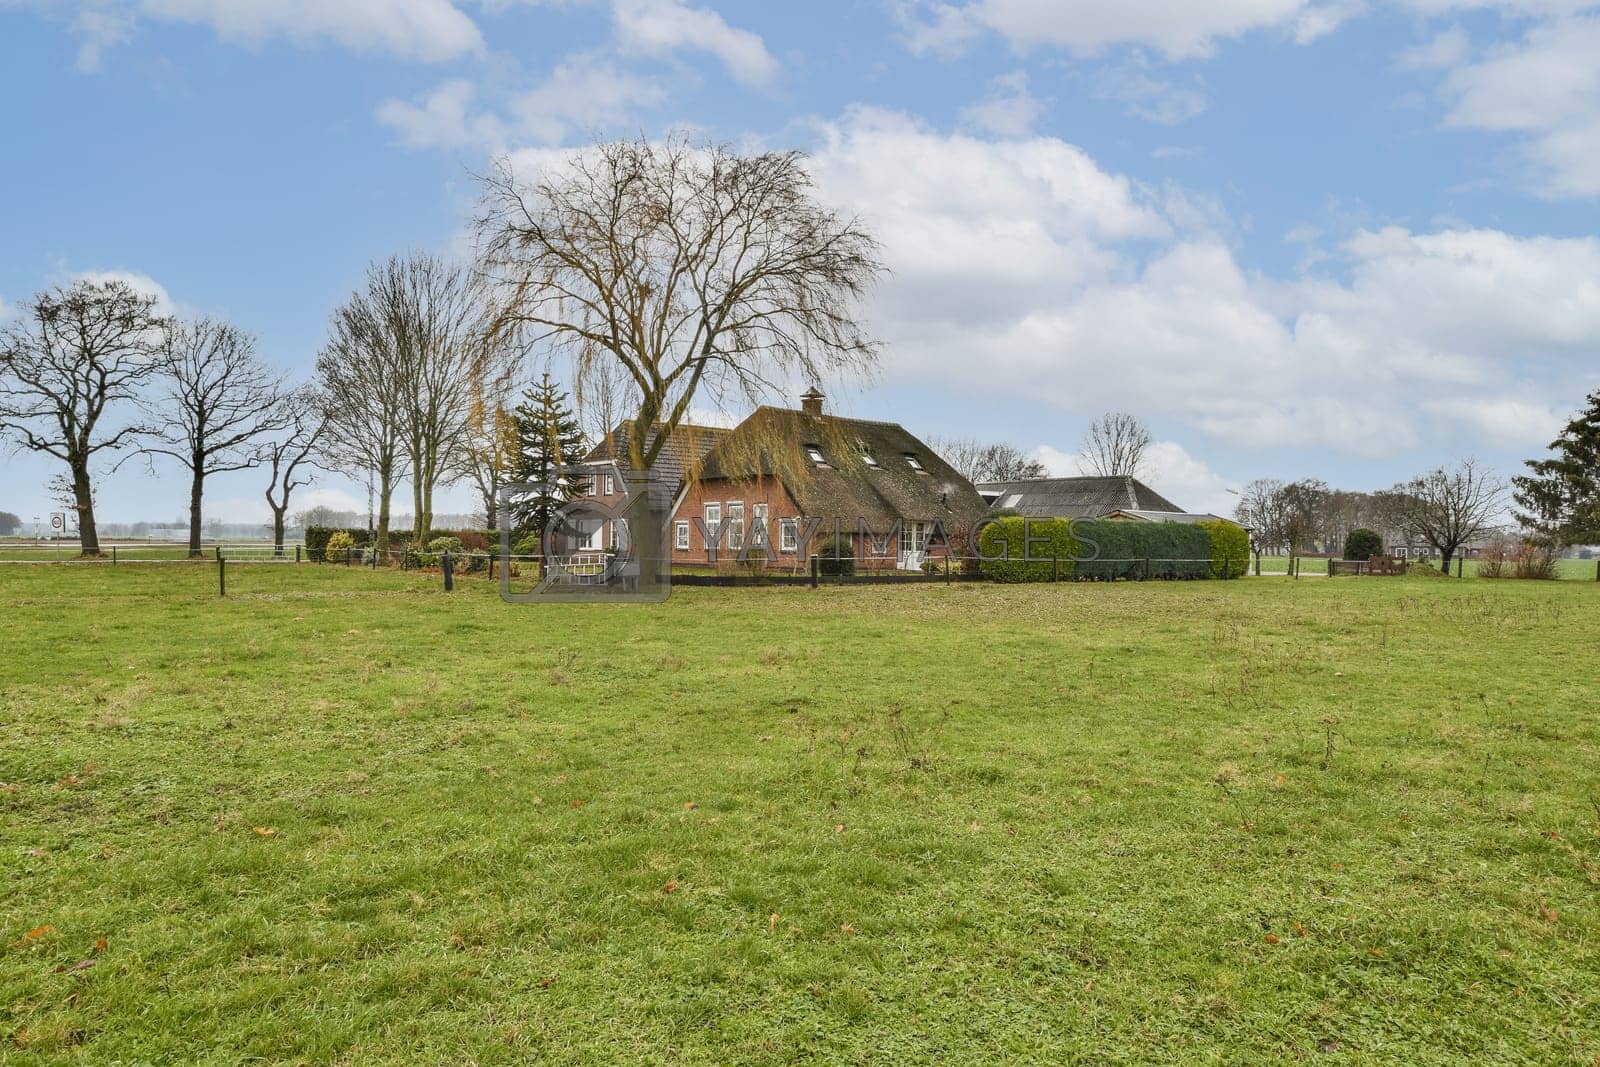 Royalty free image of a farm house in a field with a blue sky by casamedia